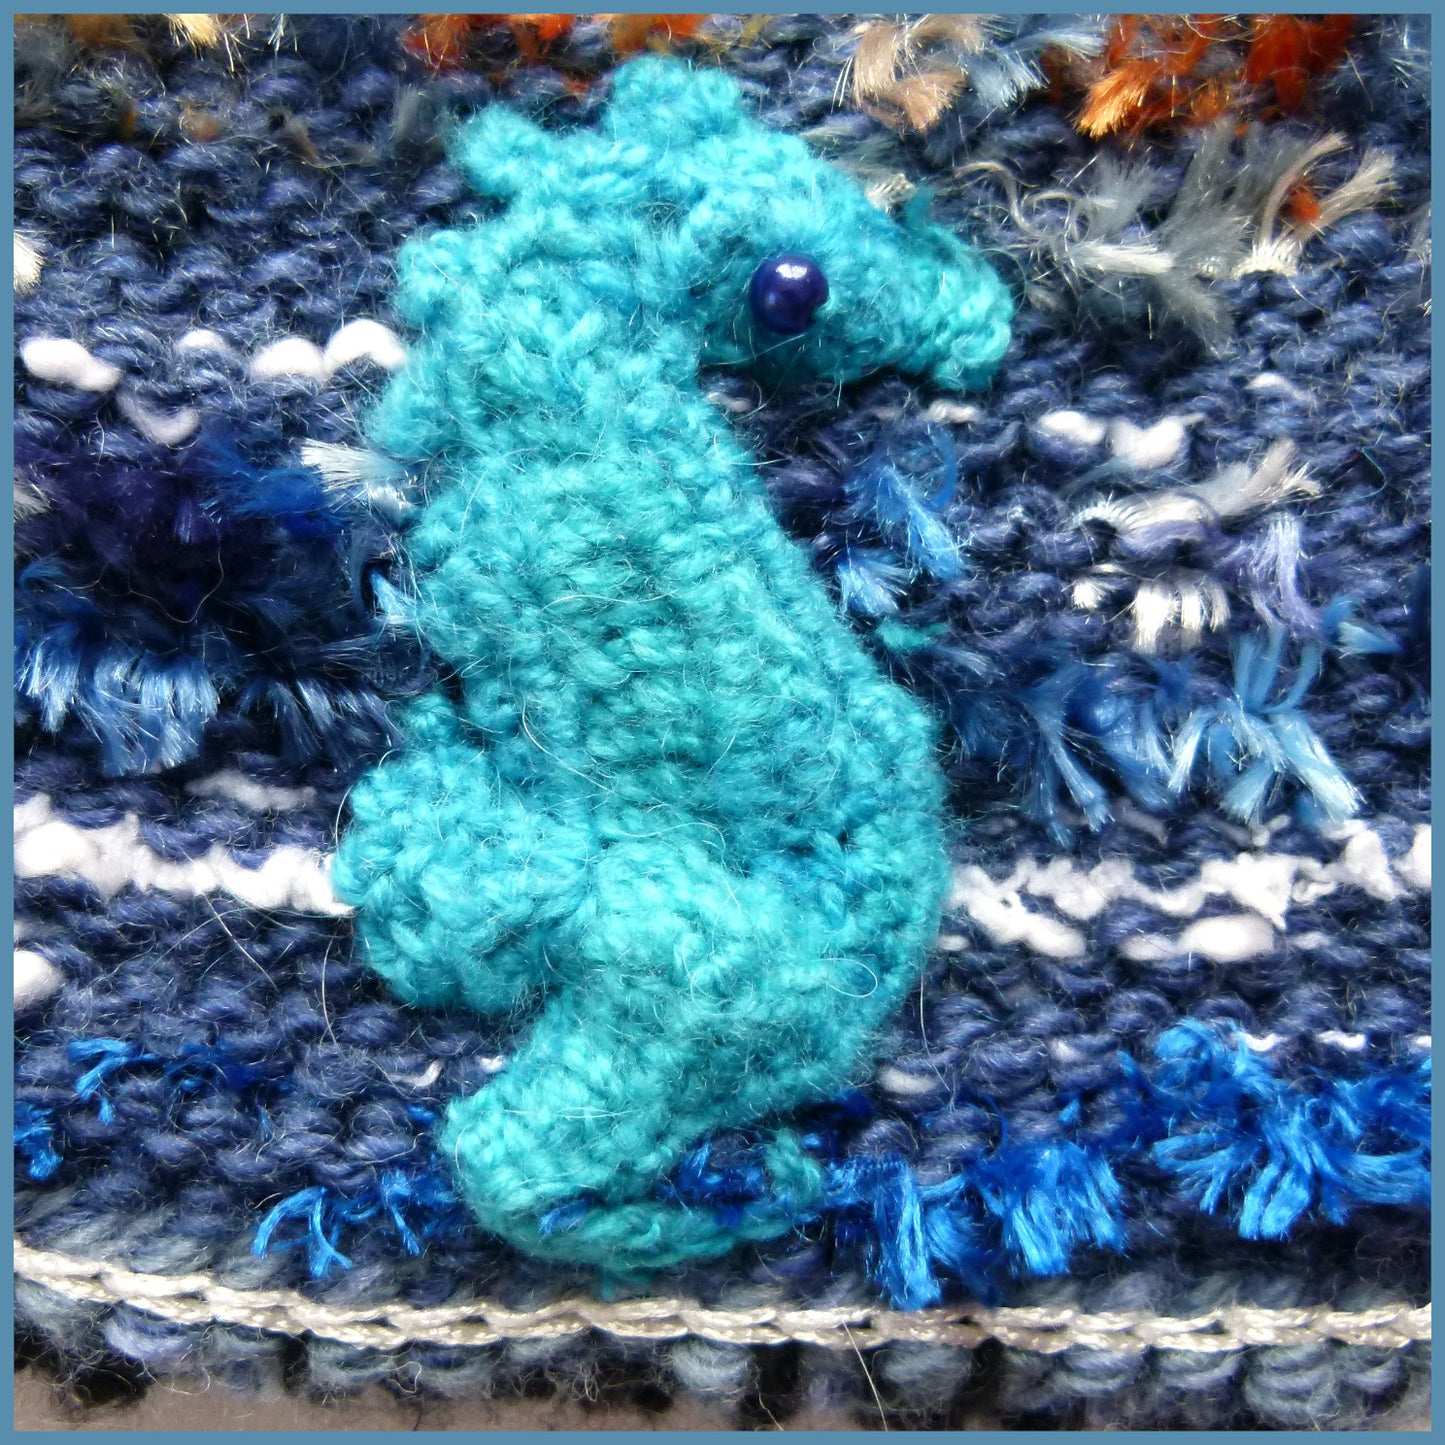 Handmade Sea Theme Textile Shoulder Bag with Turquoise Seahorse